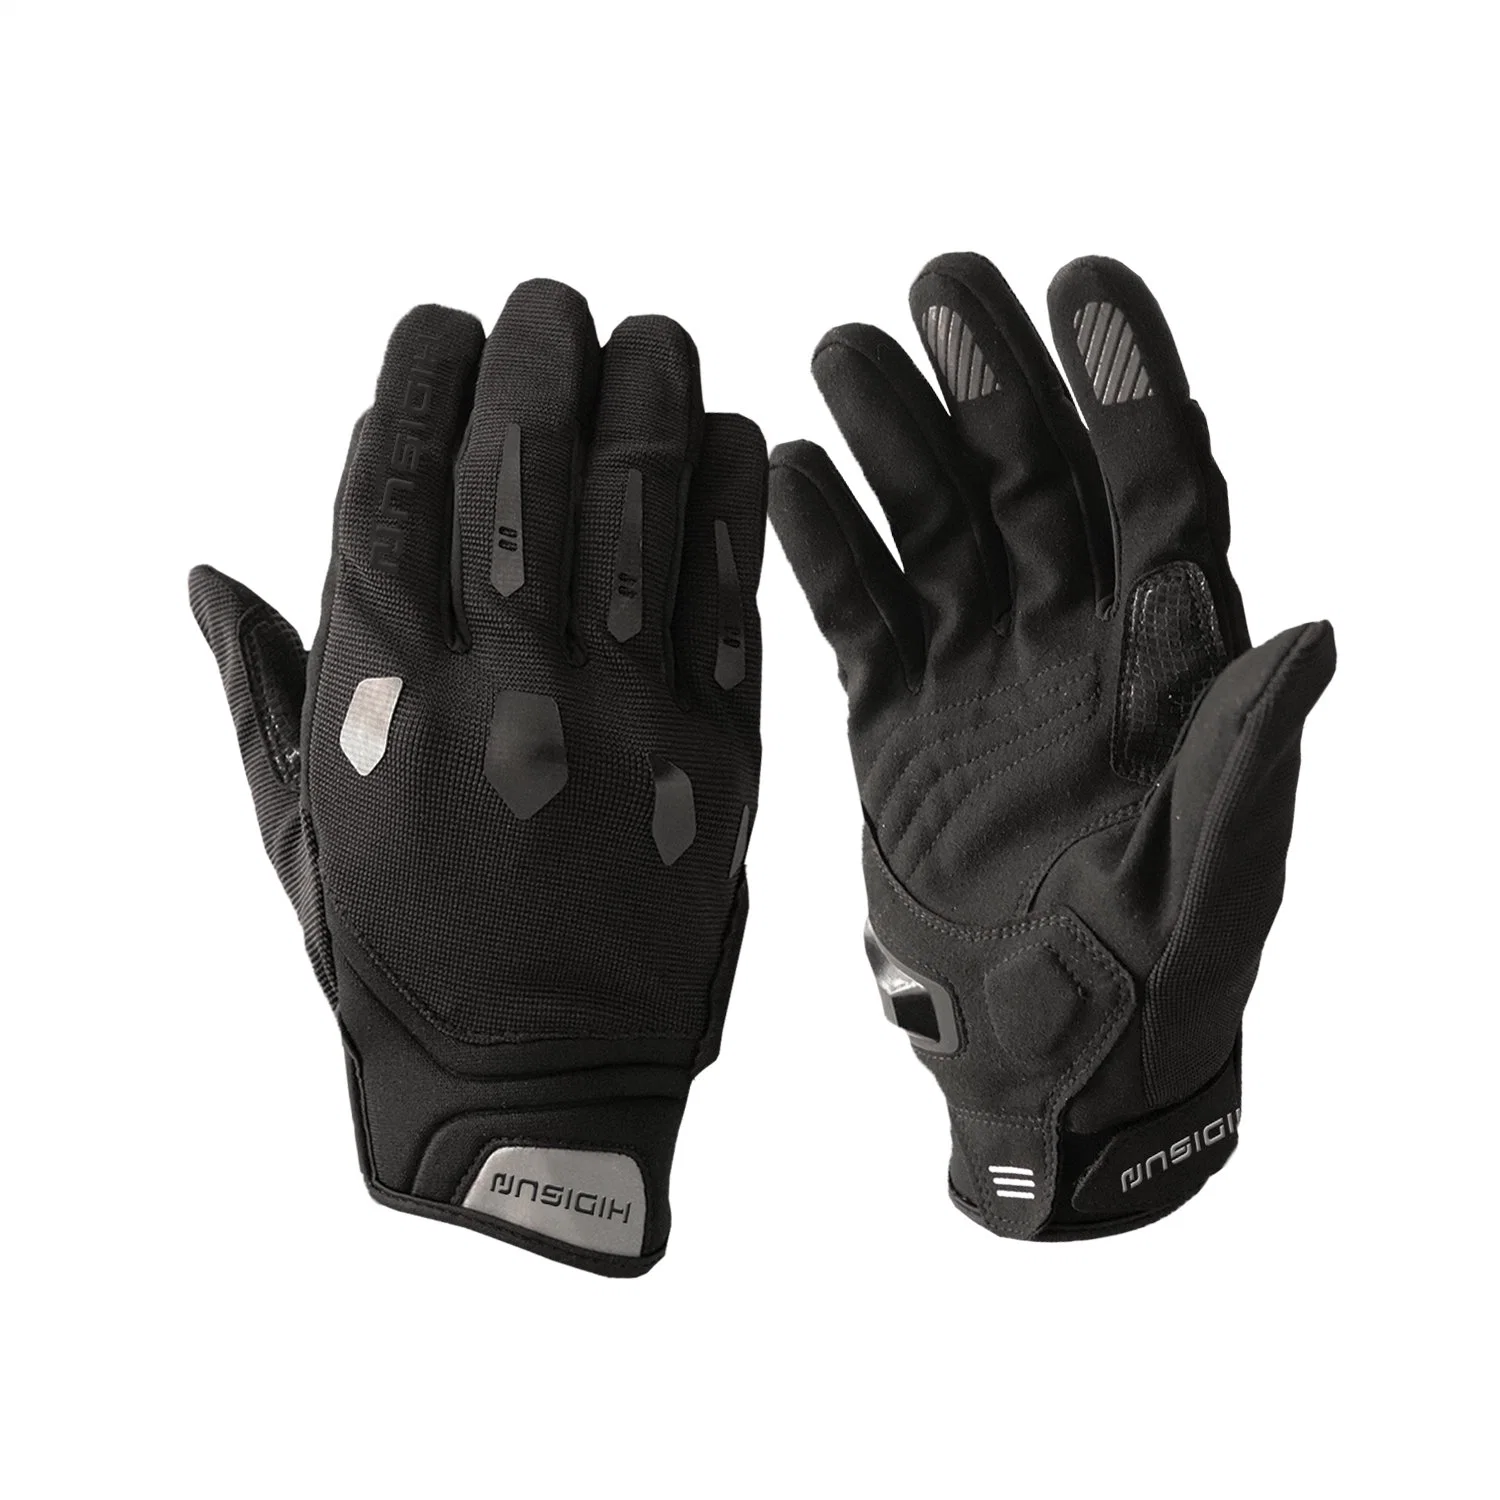 Leather Work and Labor Safety Gloves Microfiber Impact Protection Industry Work